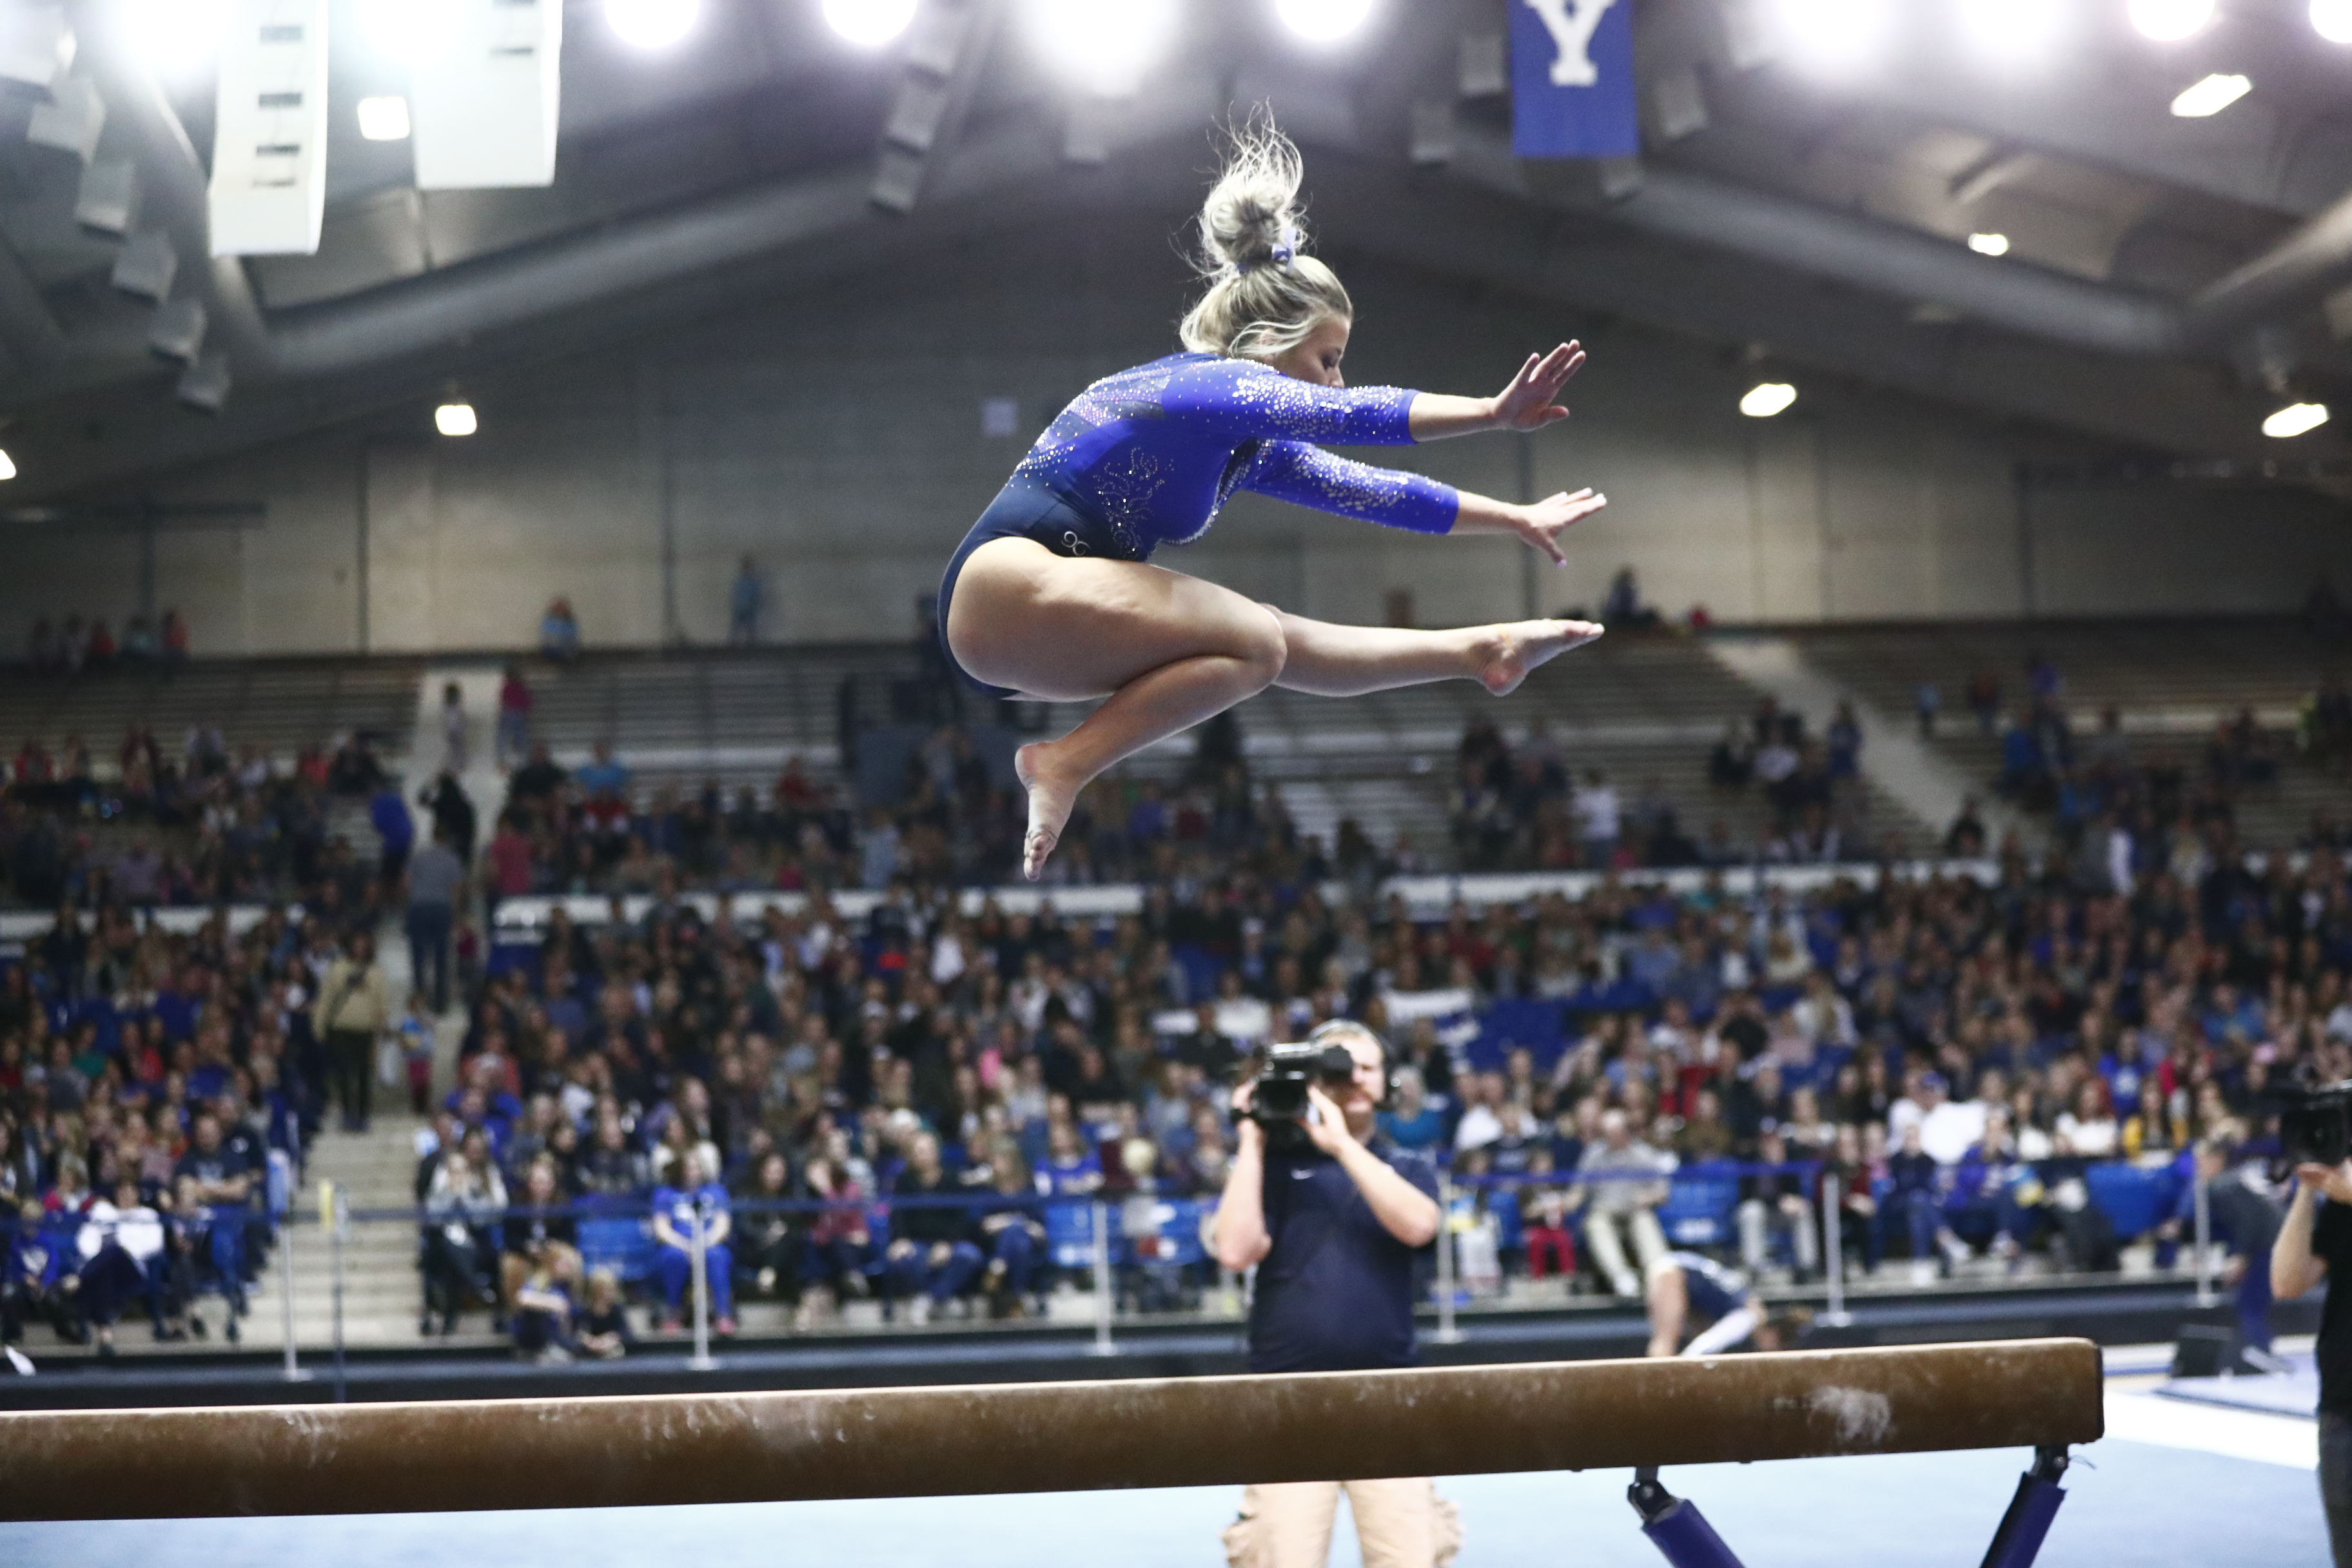 gymnast jumps on beam in front of crowd